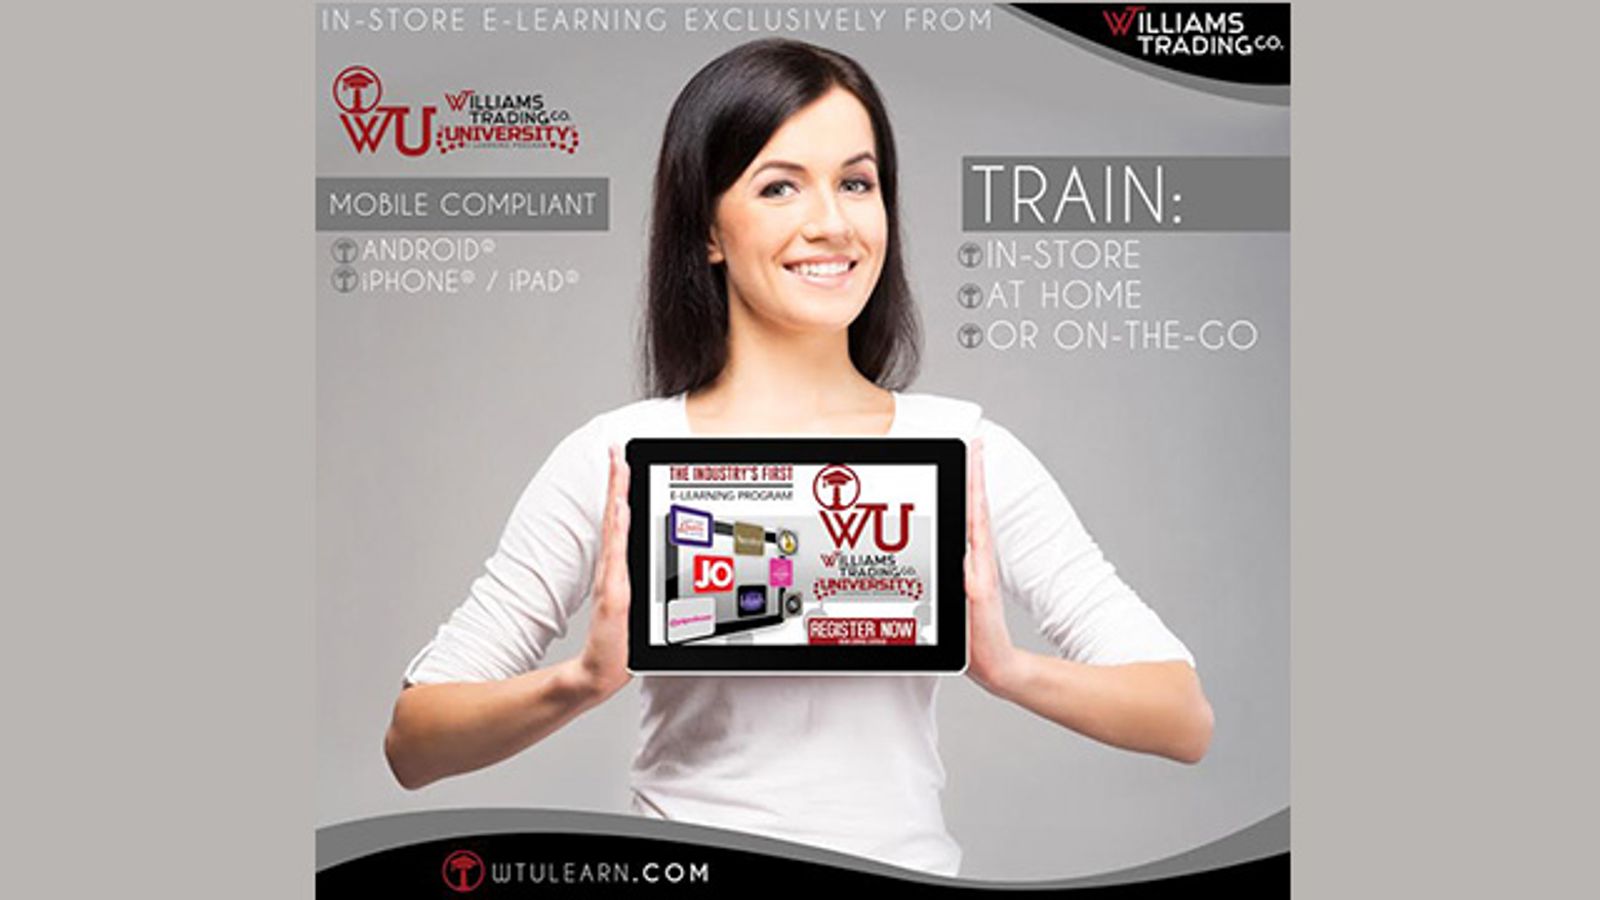 Williams' WTU e-Learning Upgrades To A Fully Mobile Platform